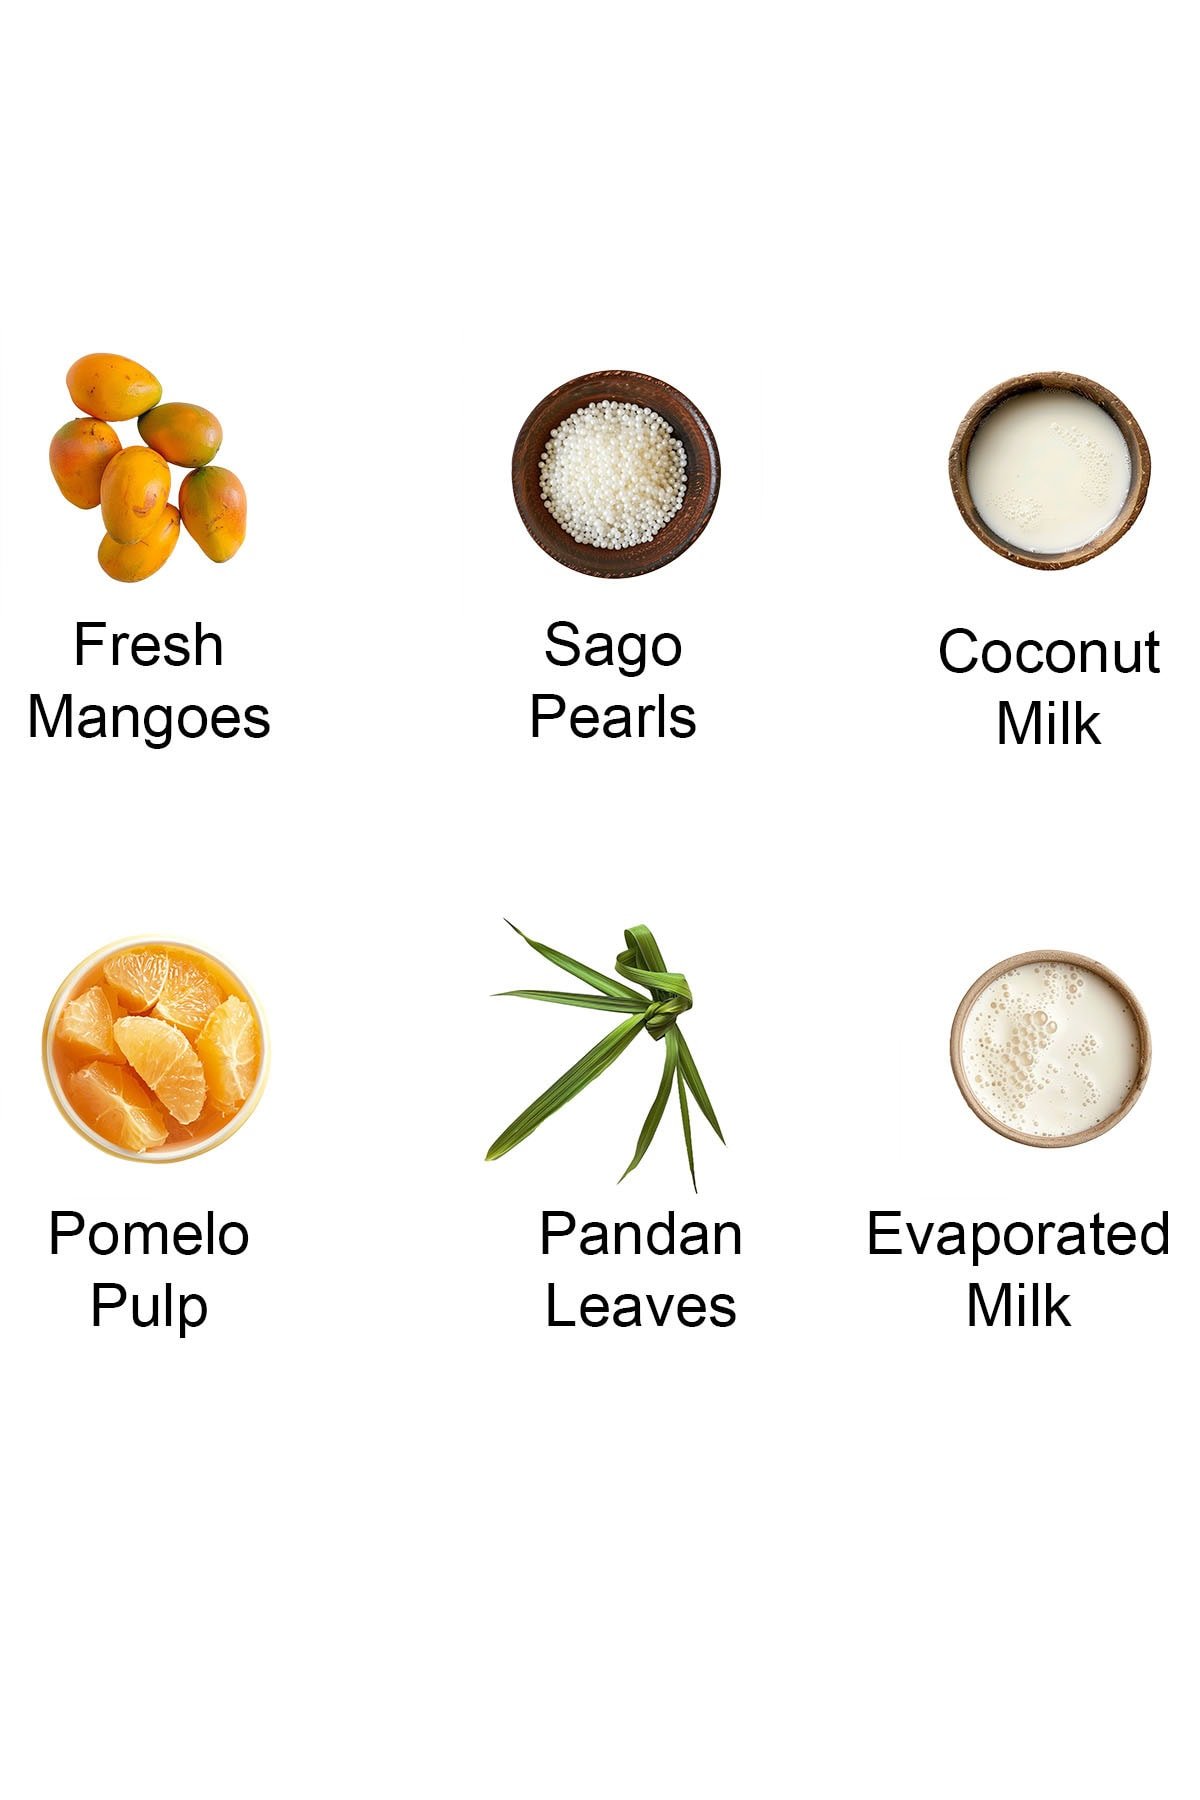 This image shows the ingredients needed to make the Mango Pomelo Sago Recipe.